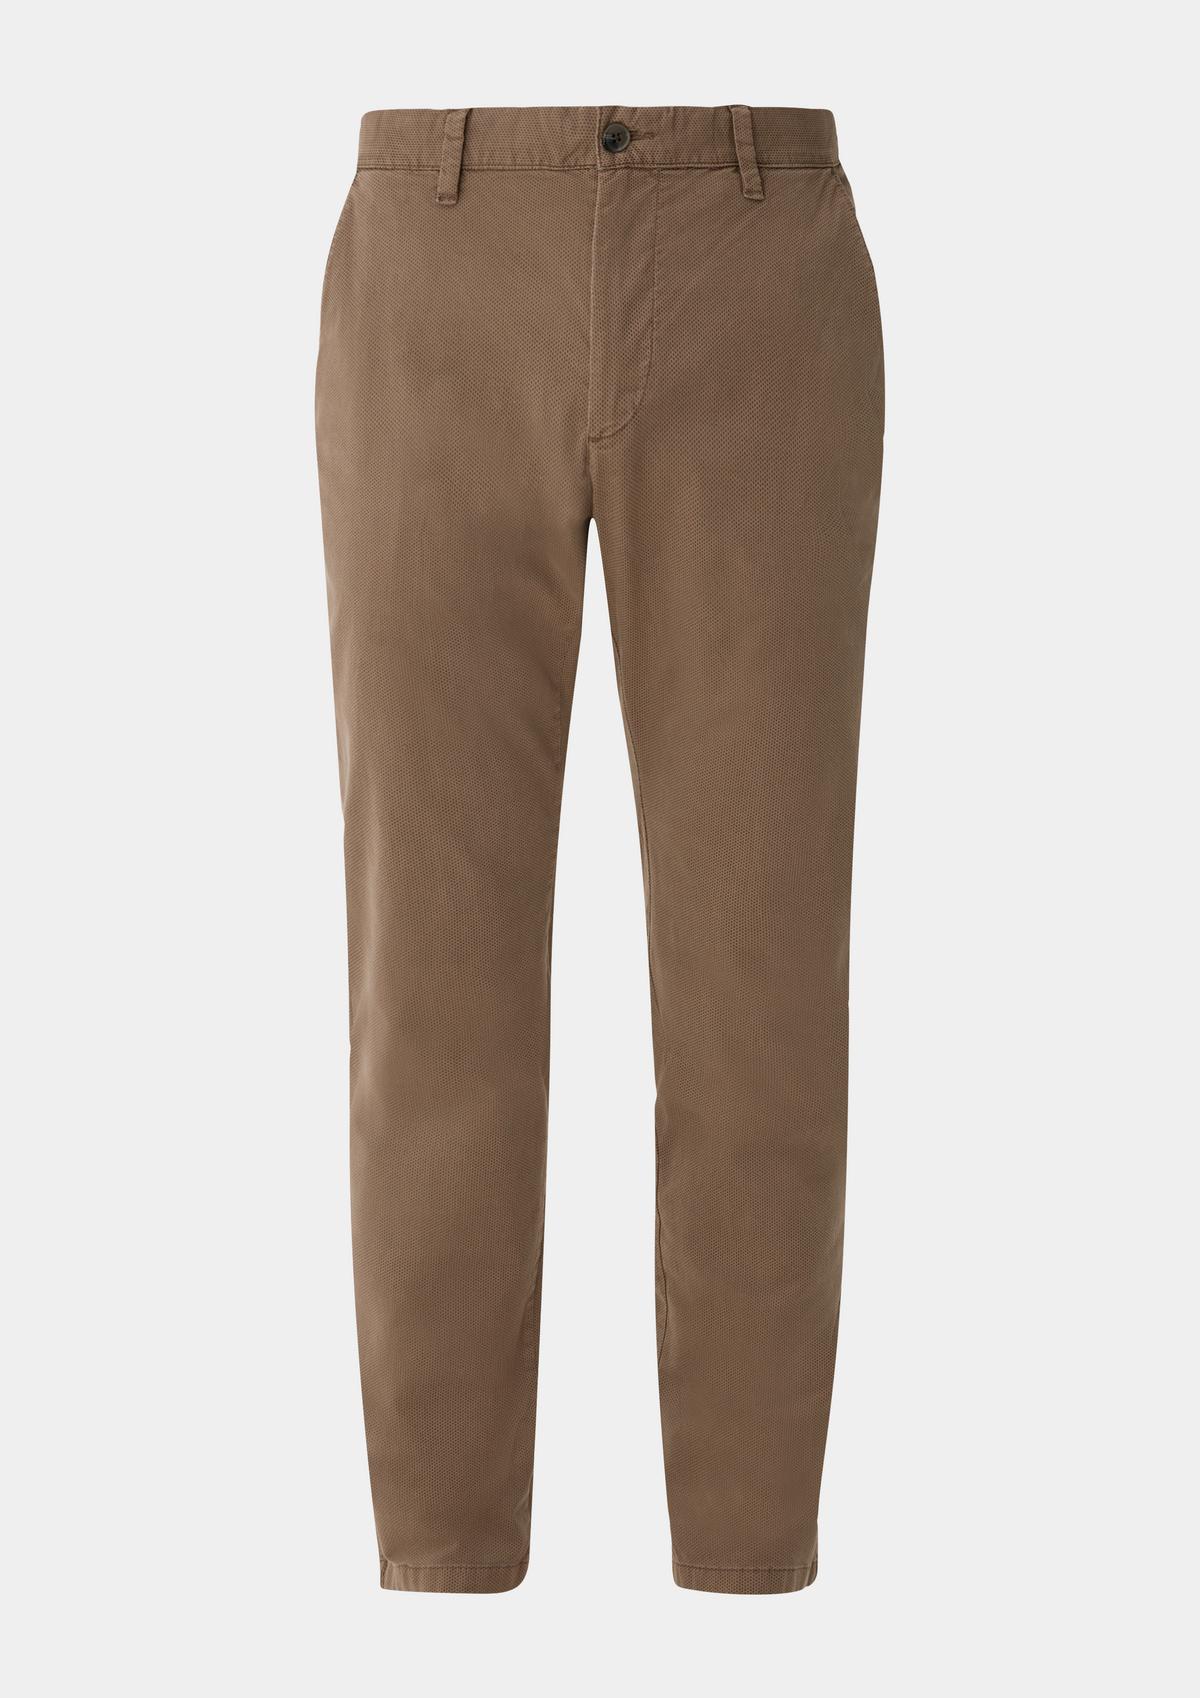 for Men Chinos